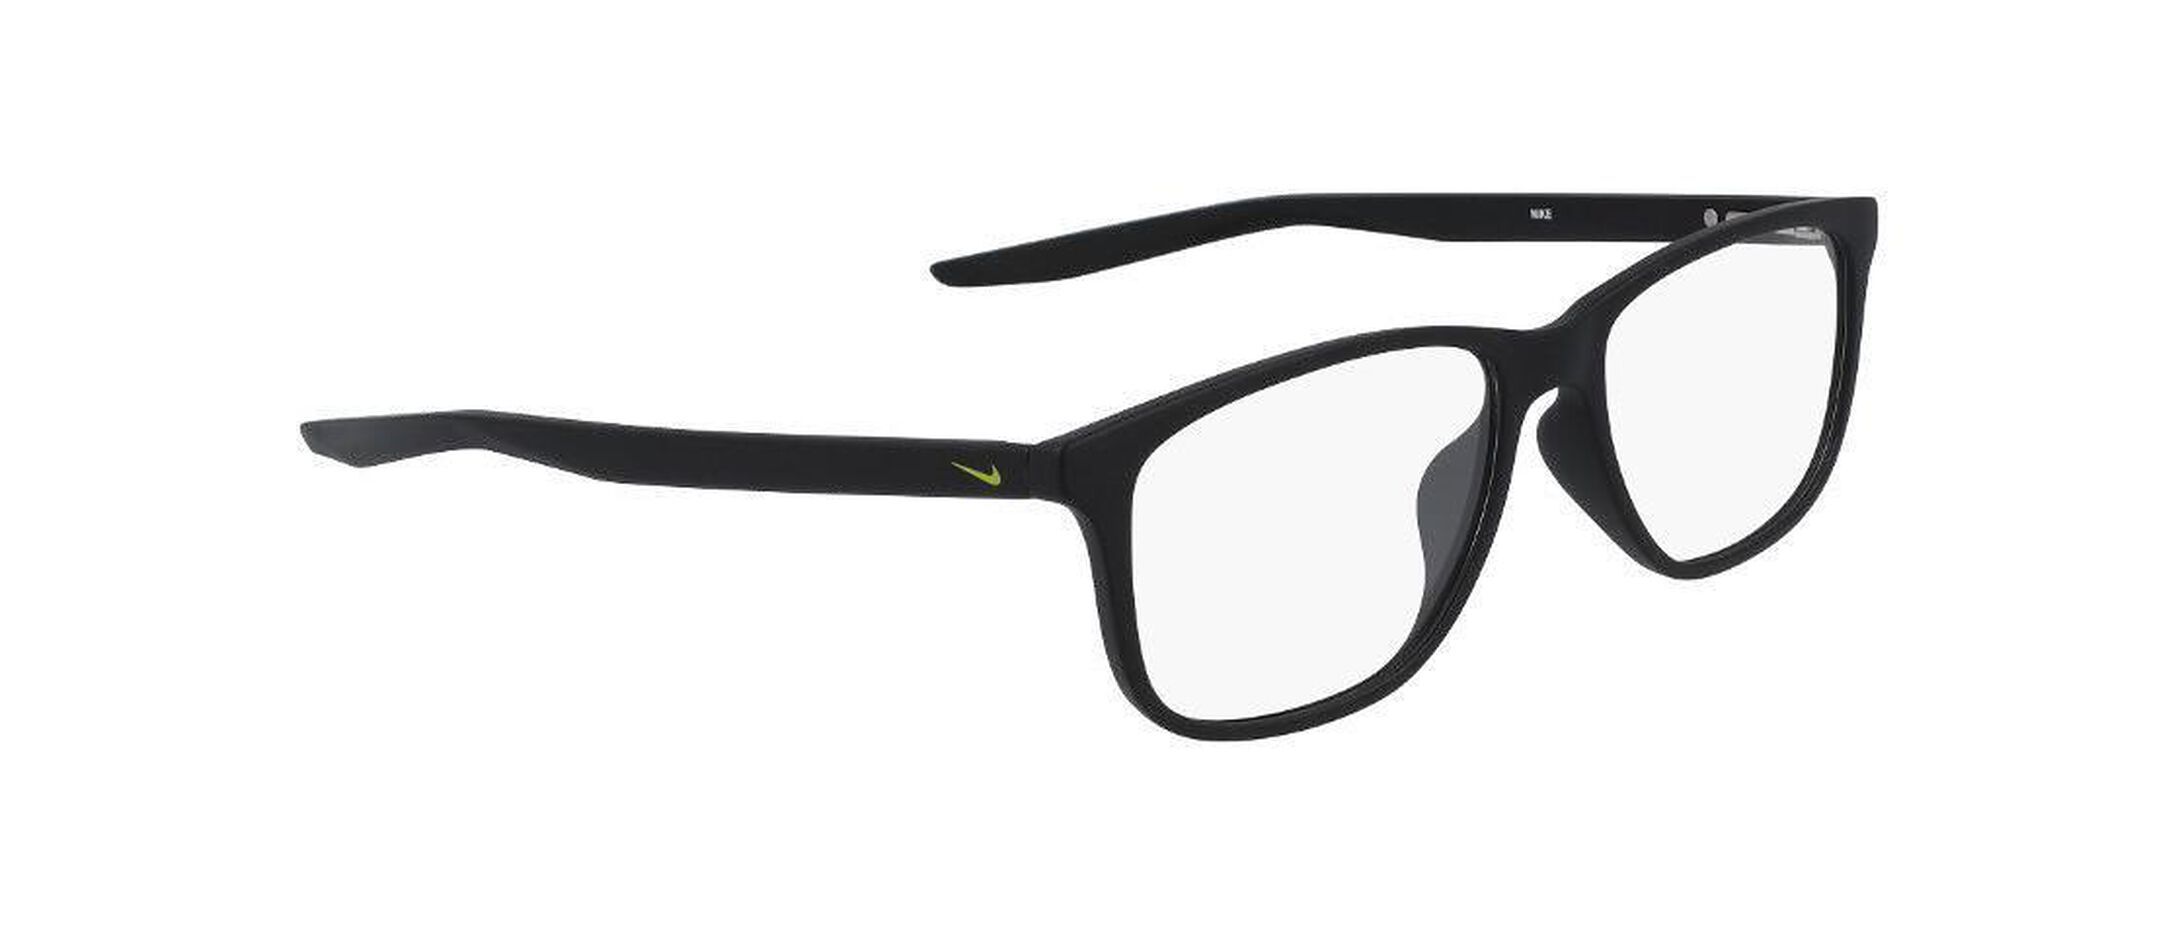 NIKE 5019 Kids Glasses Free Shipping and Eyeconic